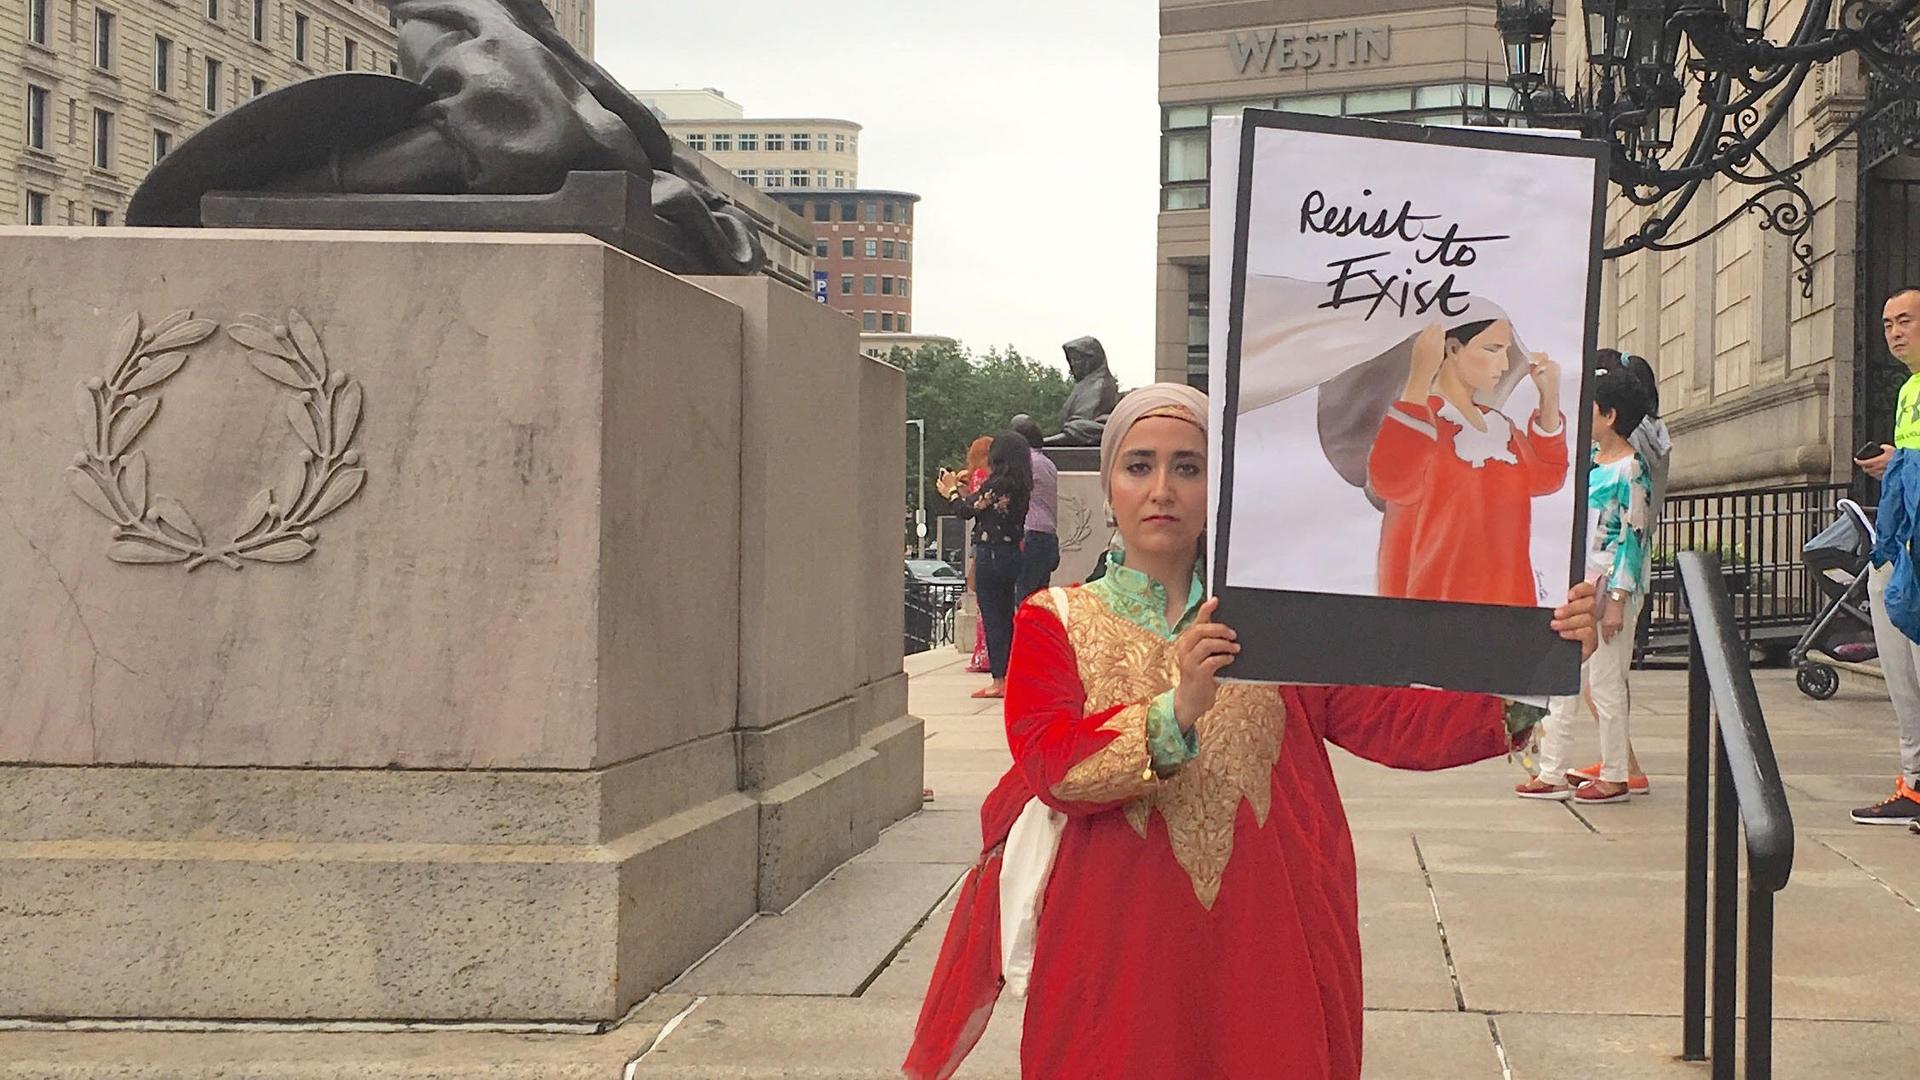 A woman in a red pheran stands holding an image of a woman in a red pheran